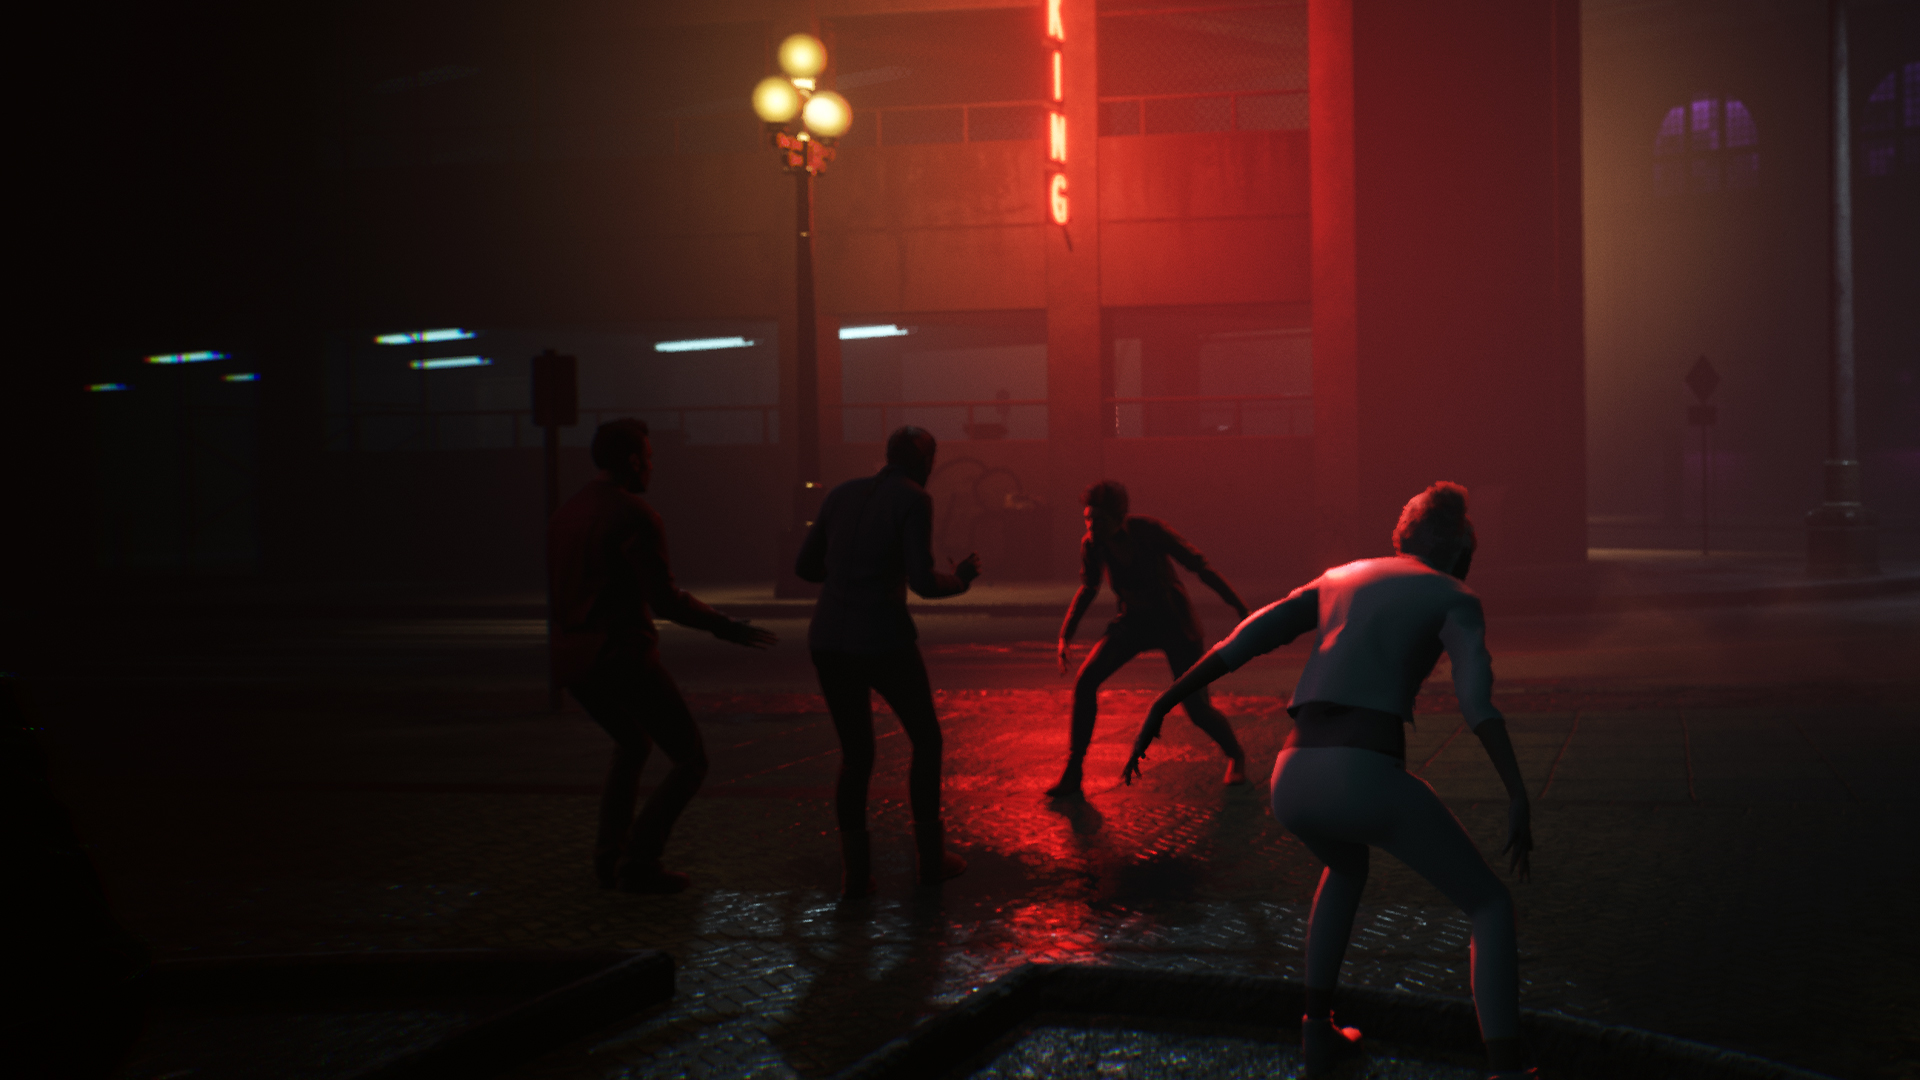 Vampire: The Masquerade - Bloodlines 2 PC gameplay at E3 2019